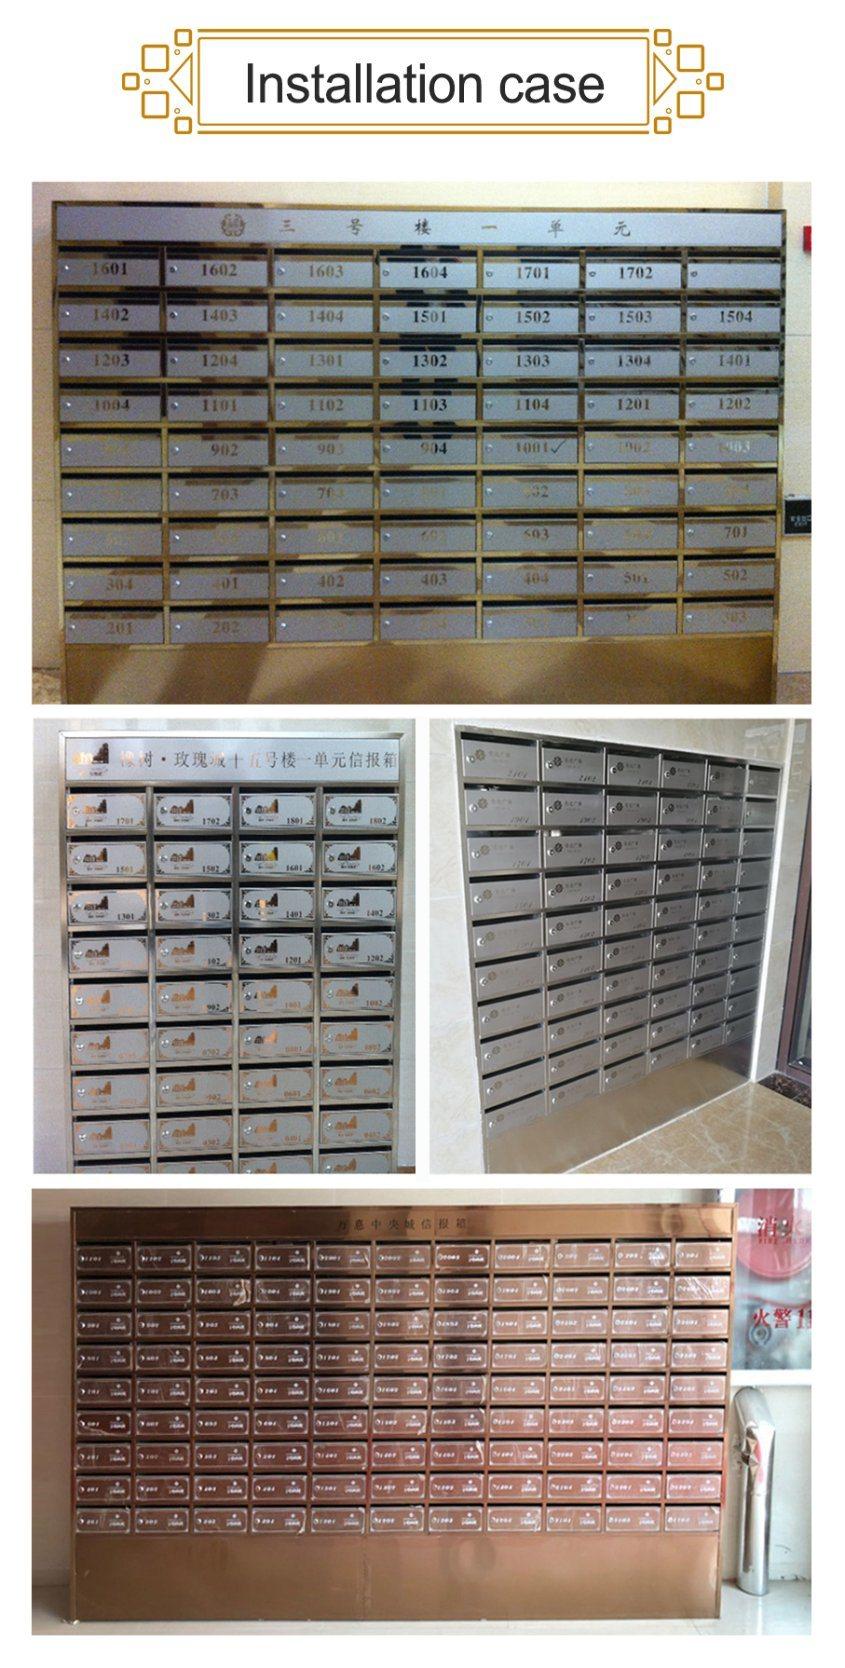 Commercial Stainless Steel Embed Exquisite Intelligent Apartment Mailbox for Sale Locking Mailbox Postbox